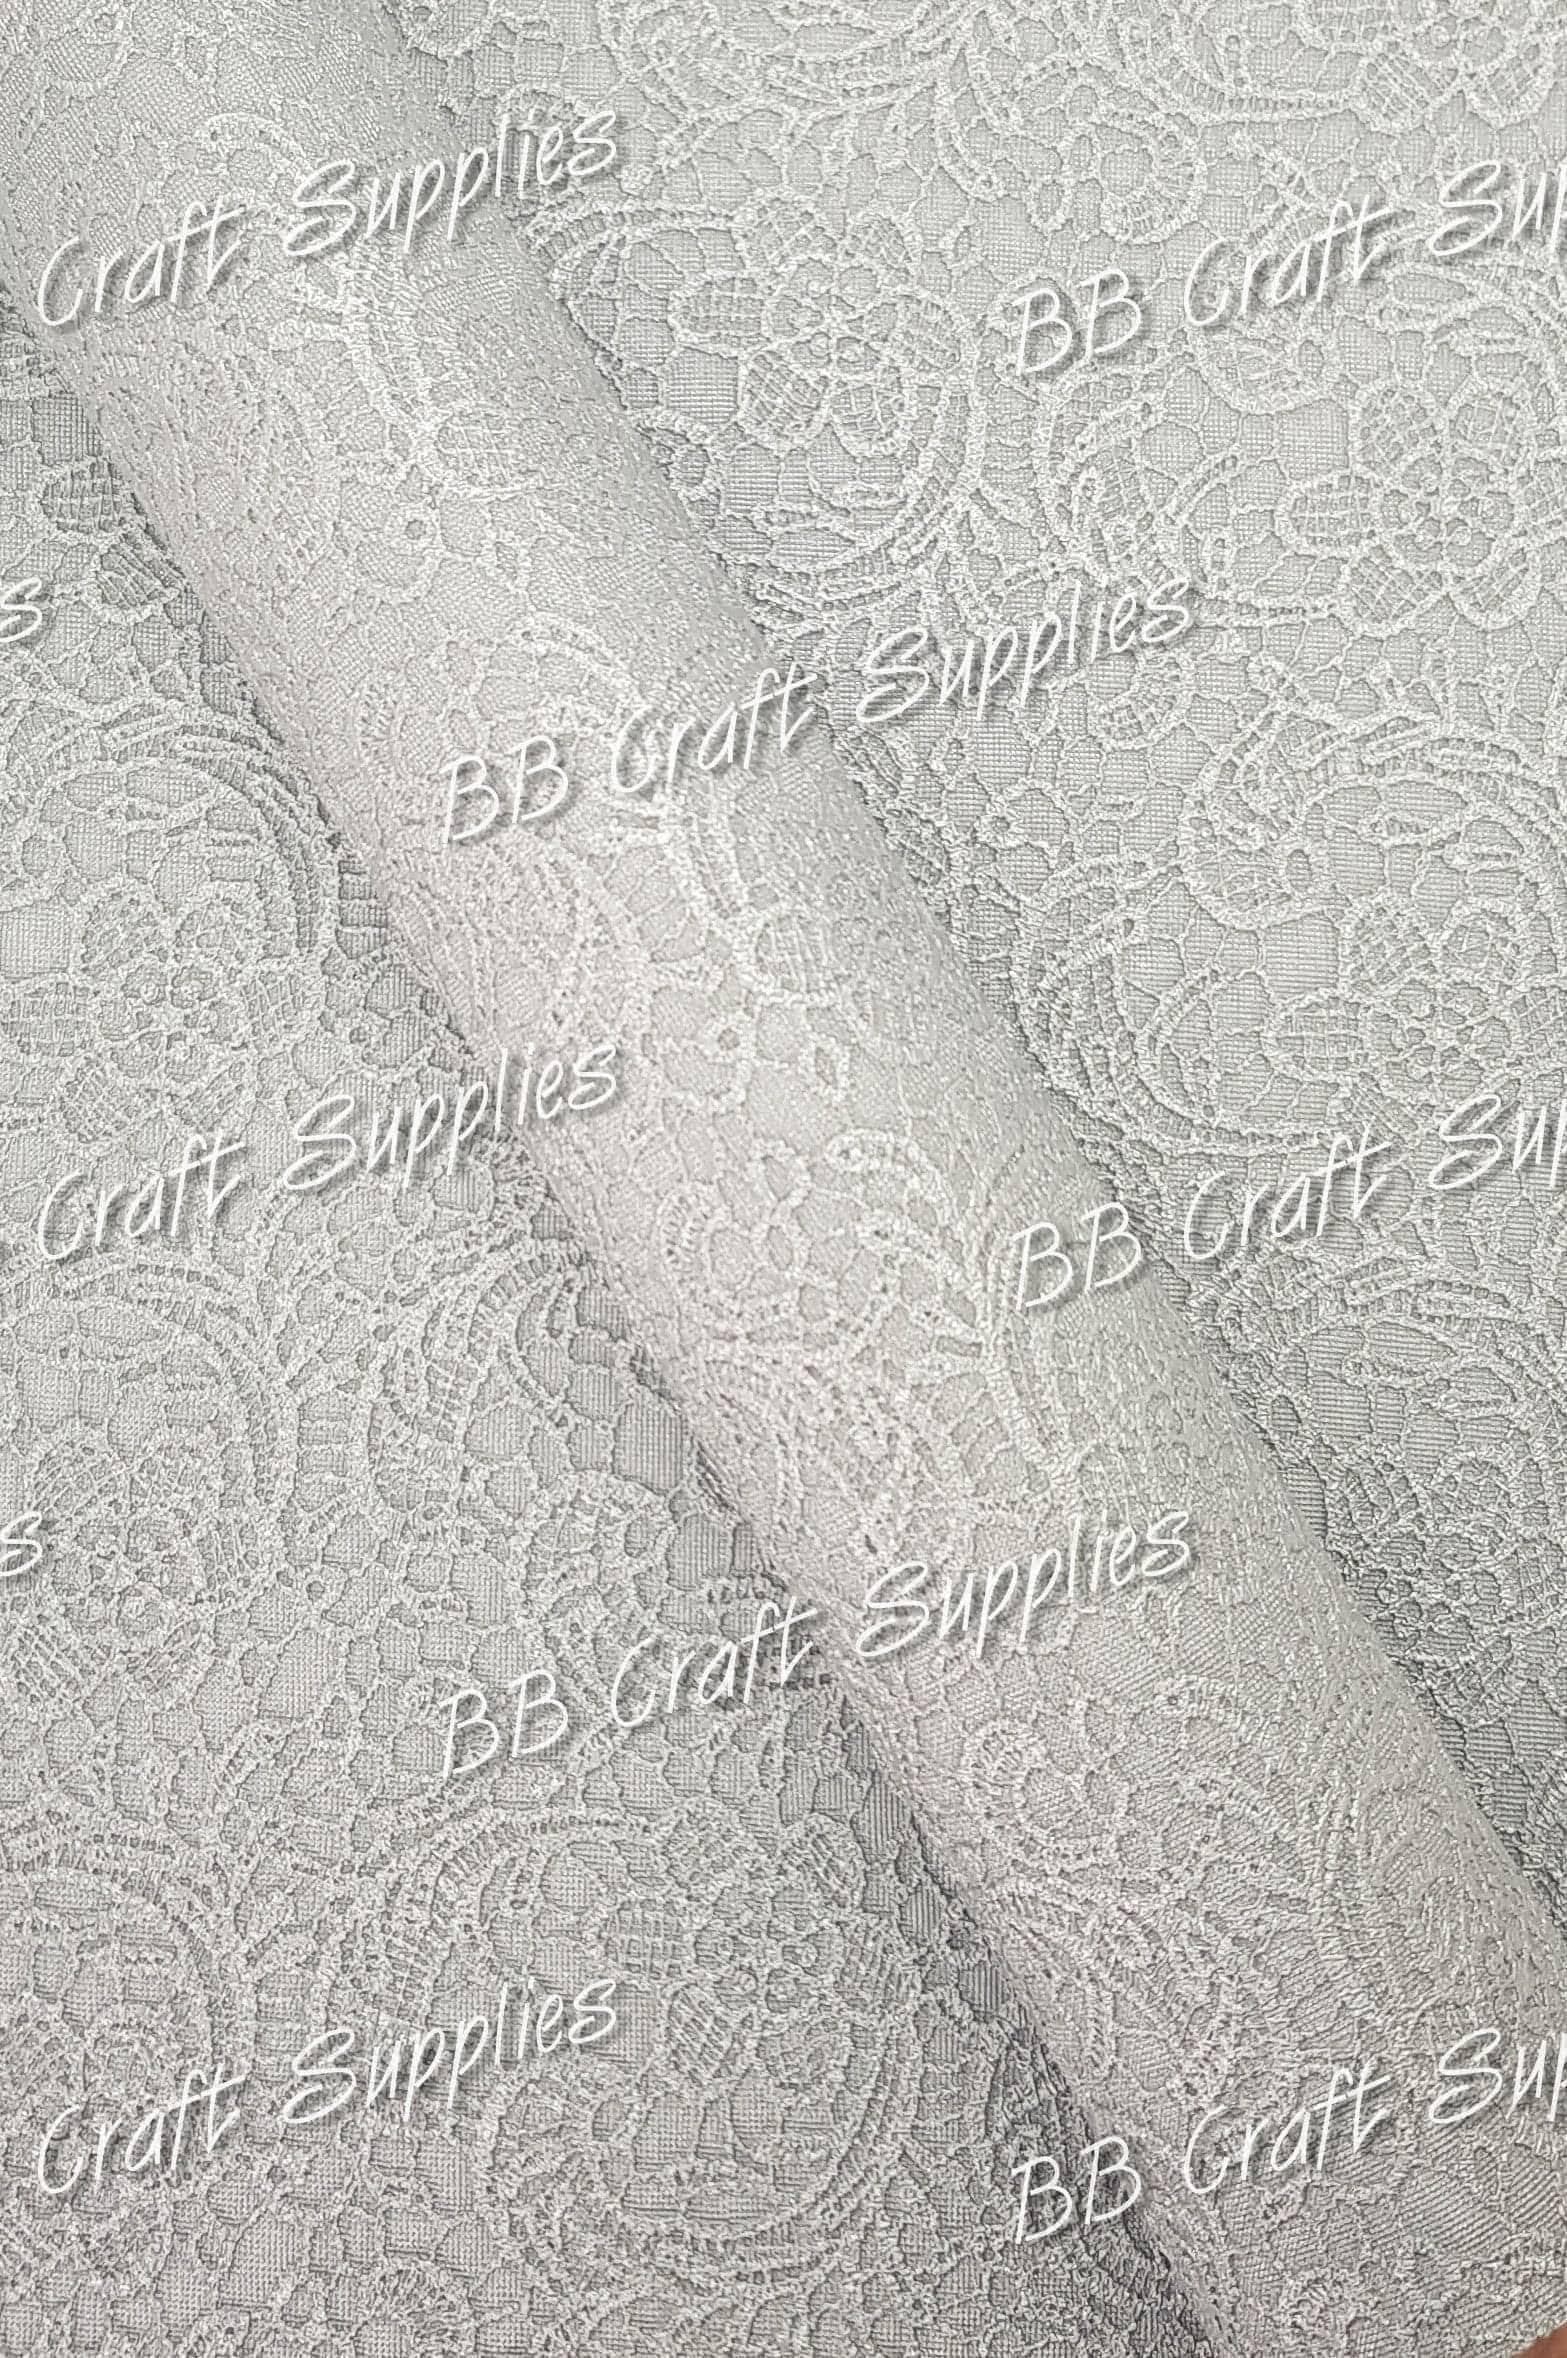 Roll - Butter Soft Embossed Lace Silver - butter, embossed, Faux, Faux Leather, Roll, soft - Bare Butler Faux Leather Supplies 